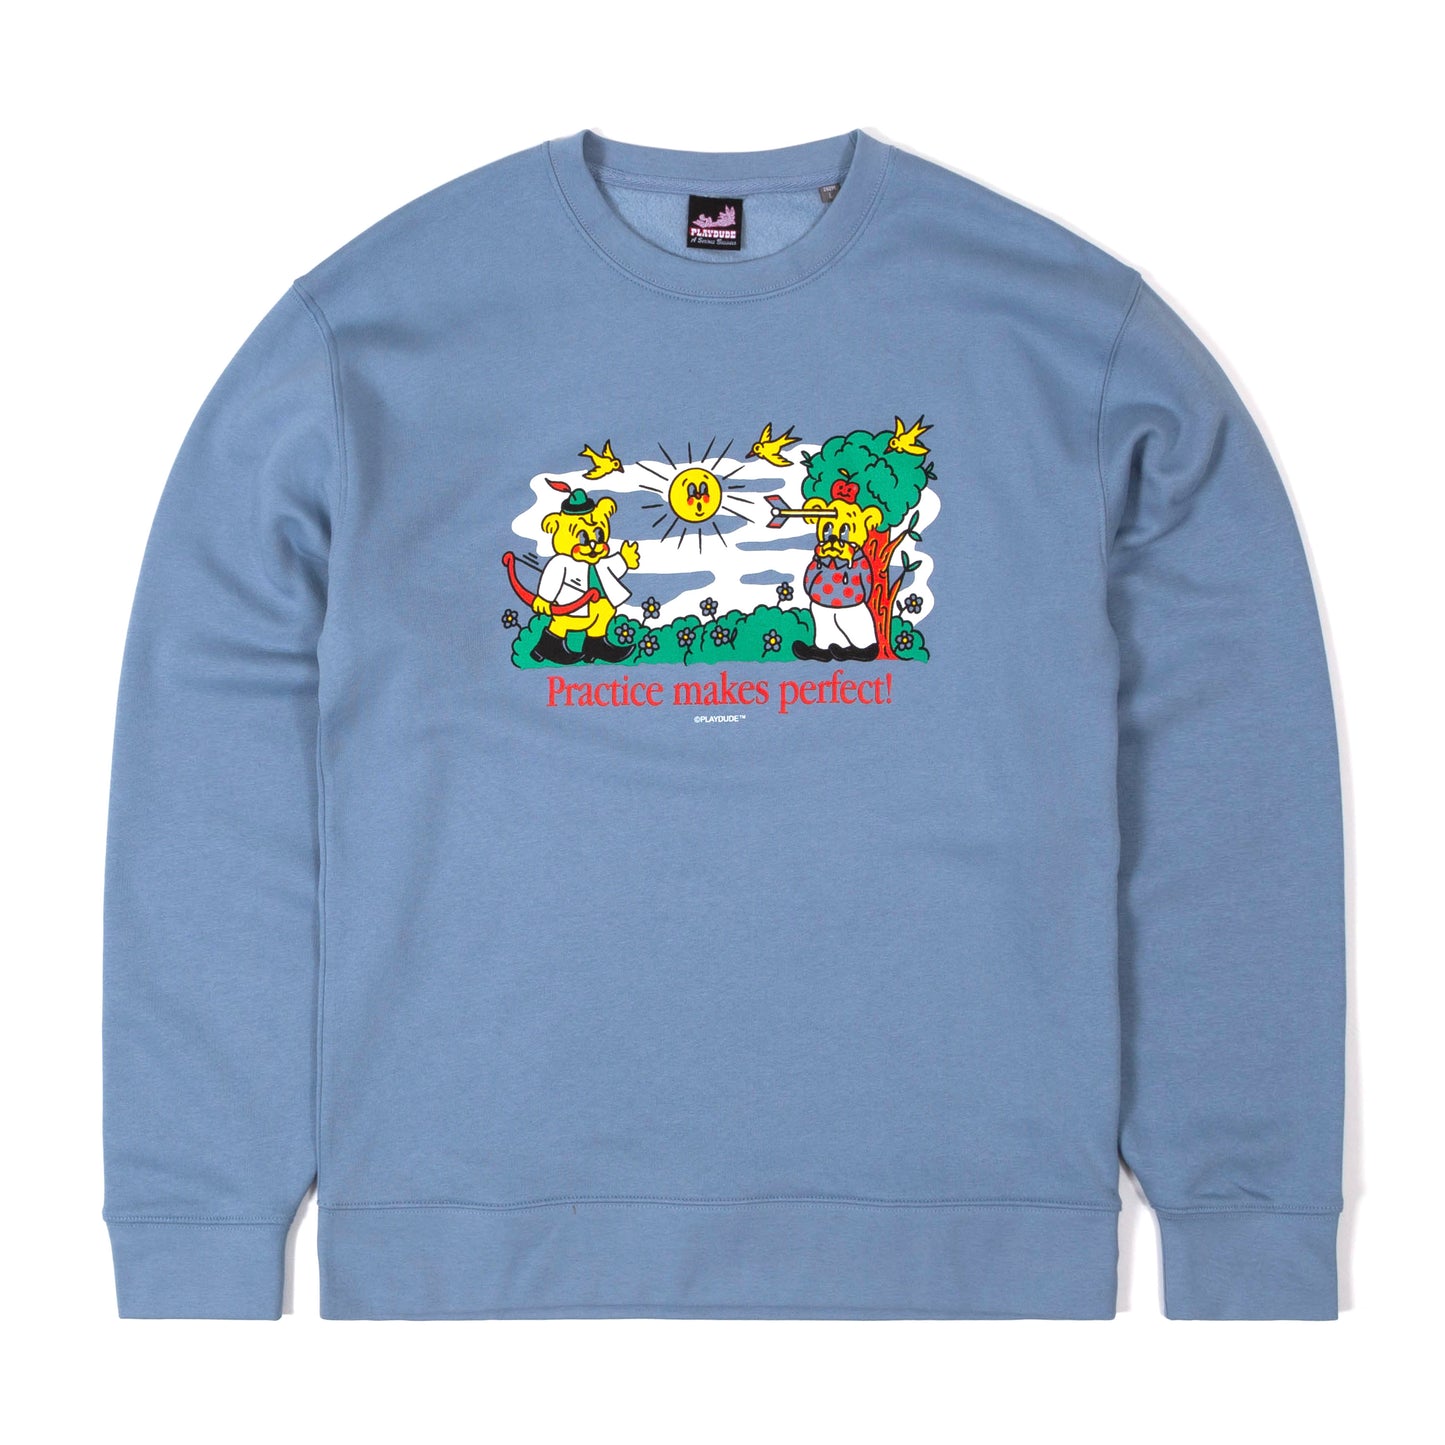 Practice Makes Perfect Crewneck Baby Blue Sweater from Playdude